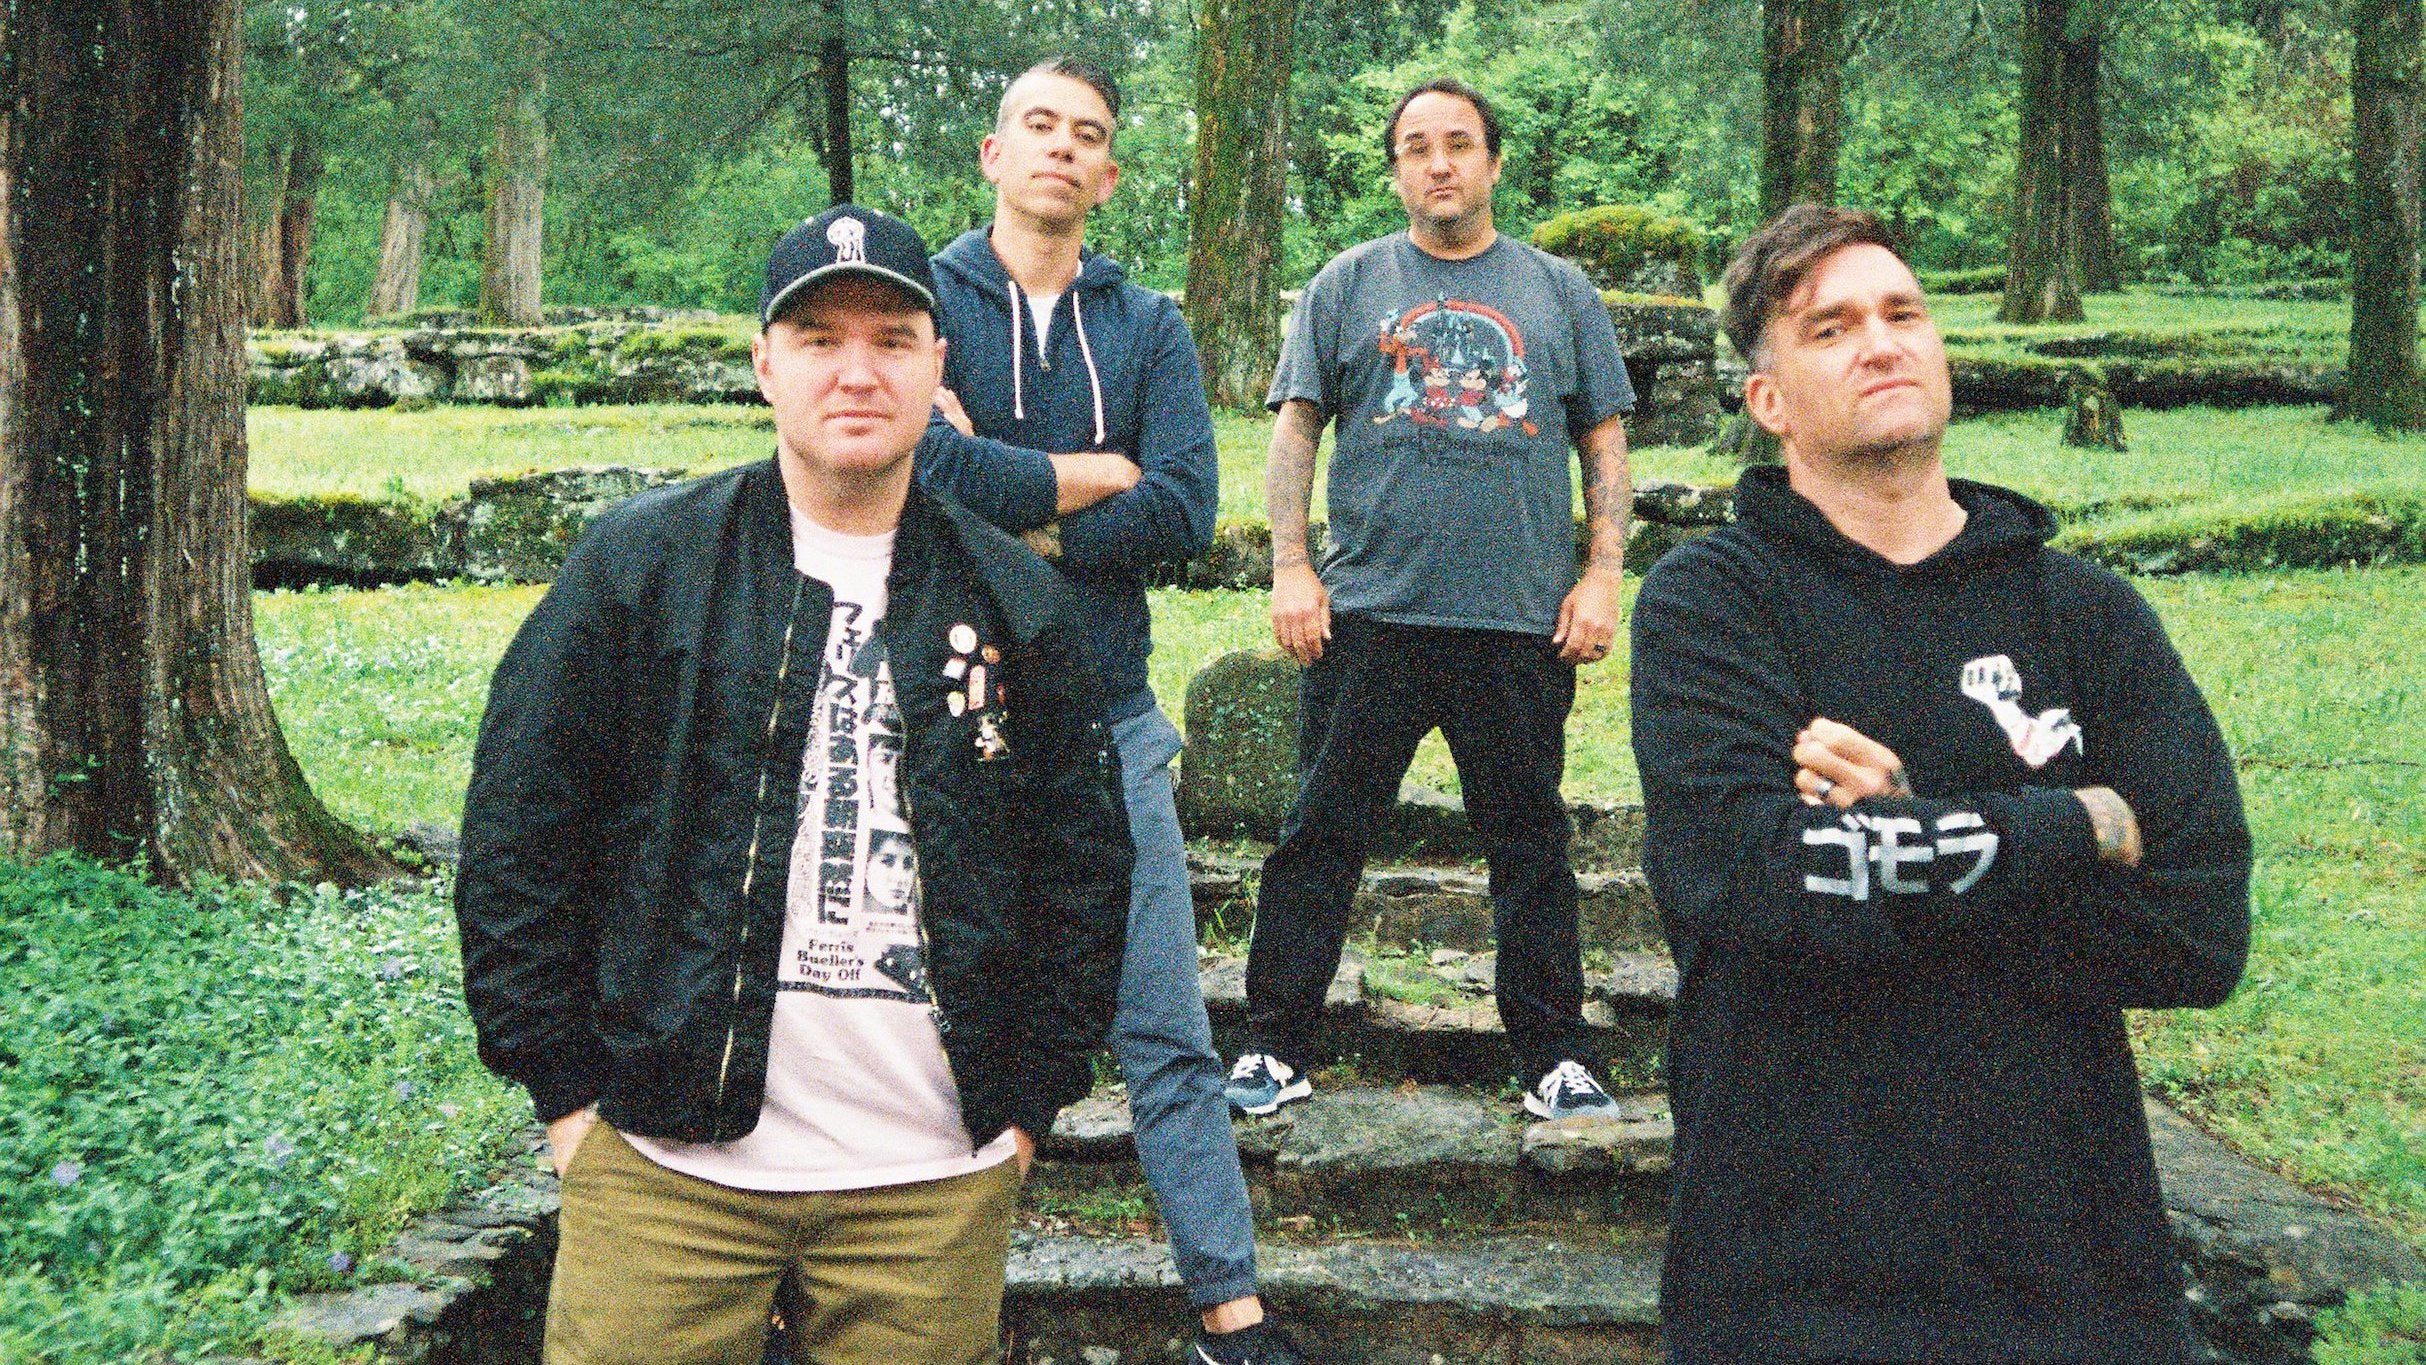 New Found Glory in Somerville promo photo for NFG presale offer code